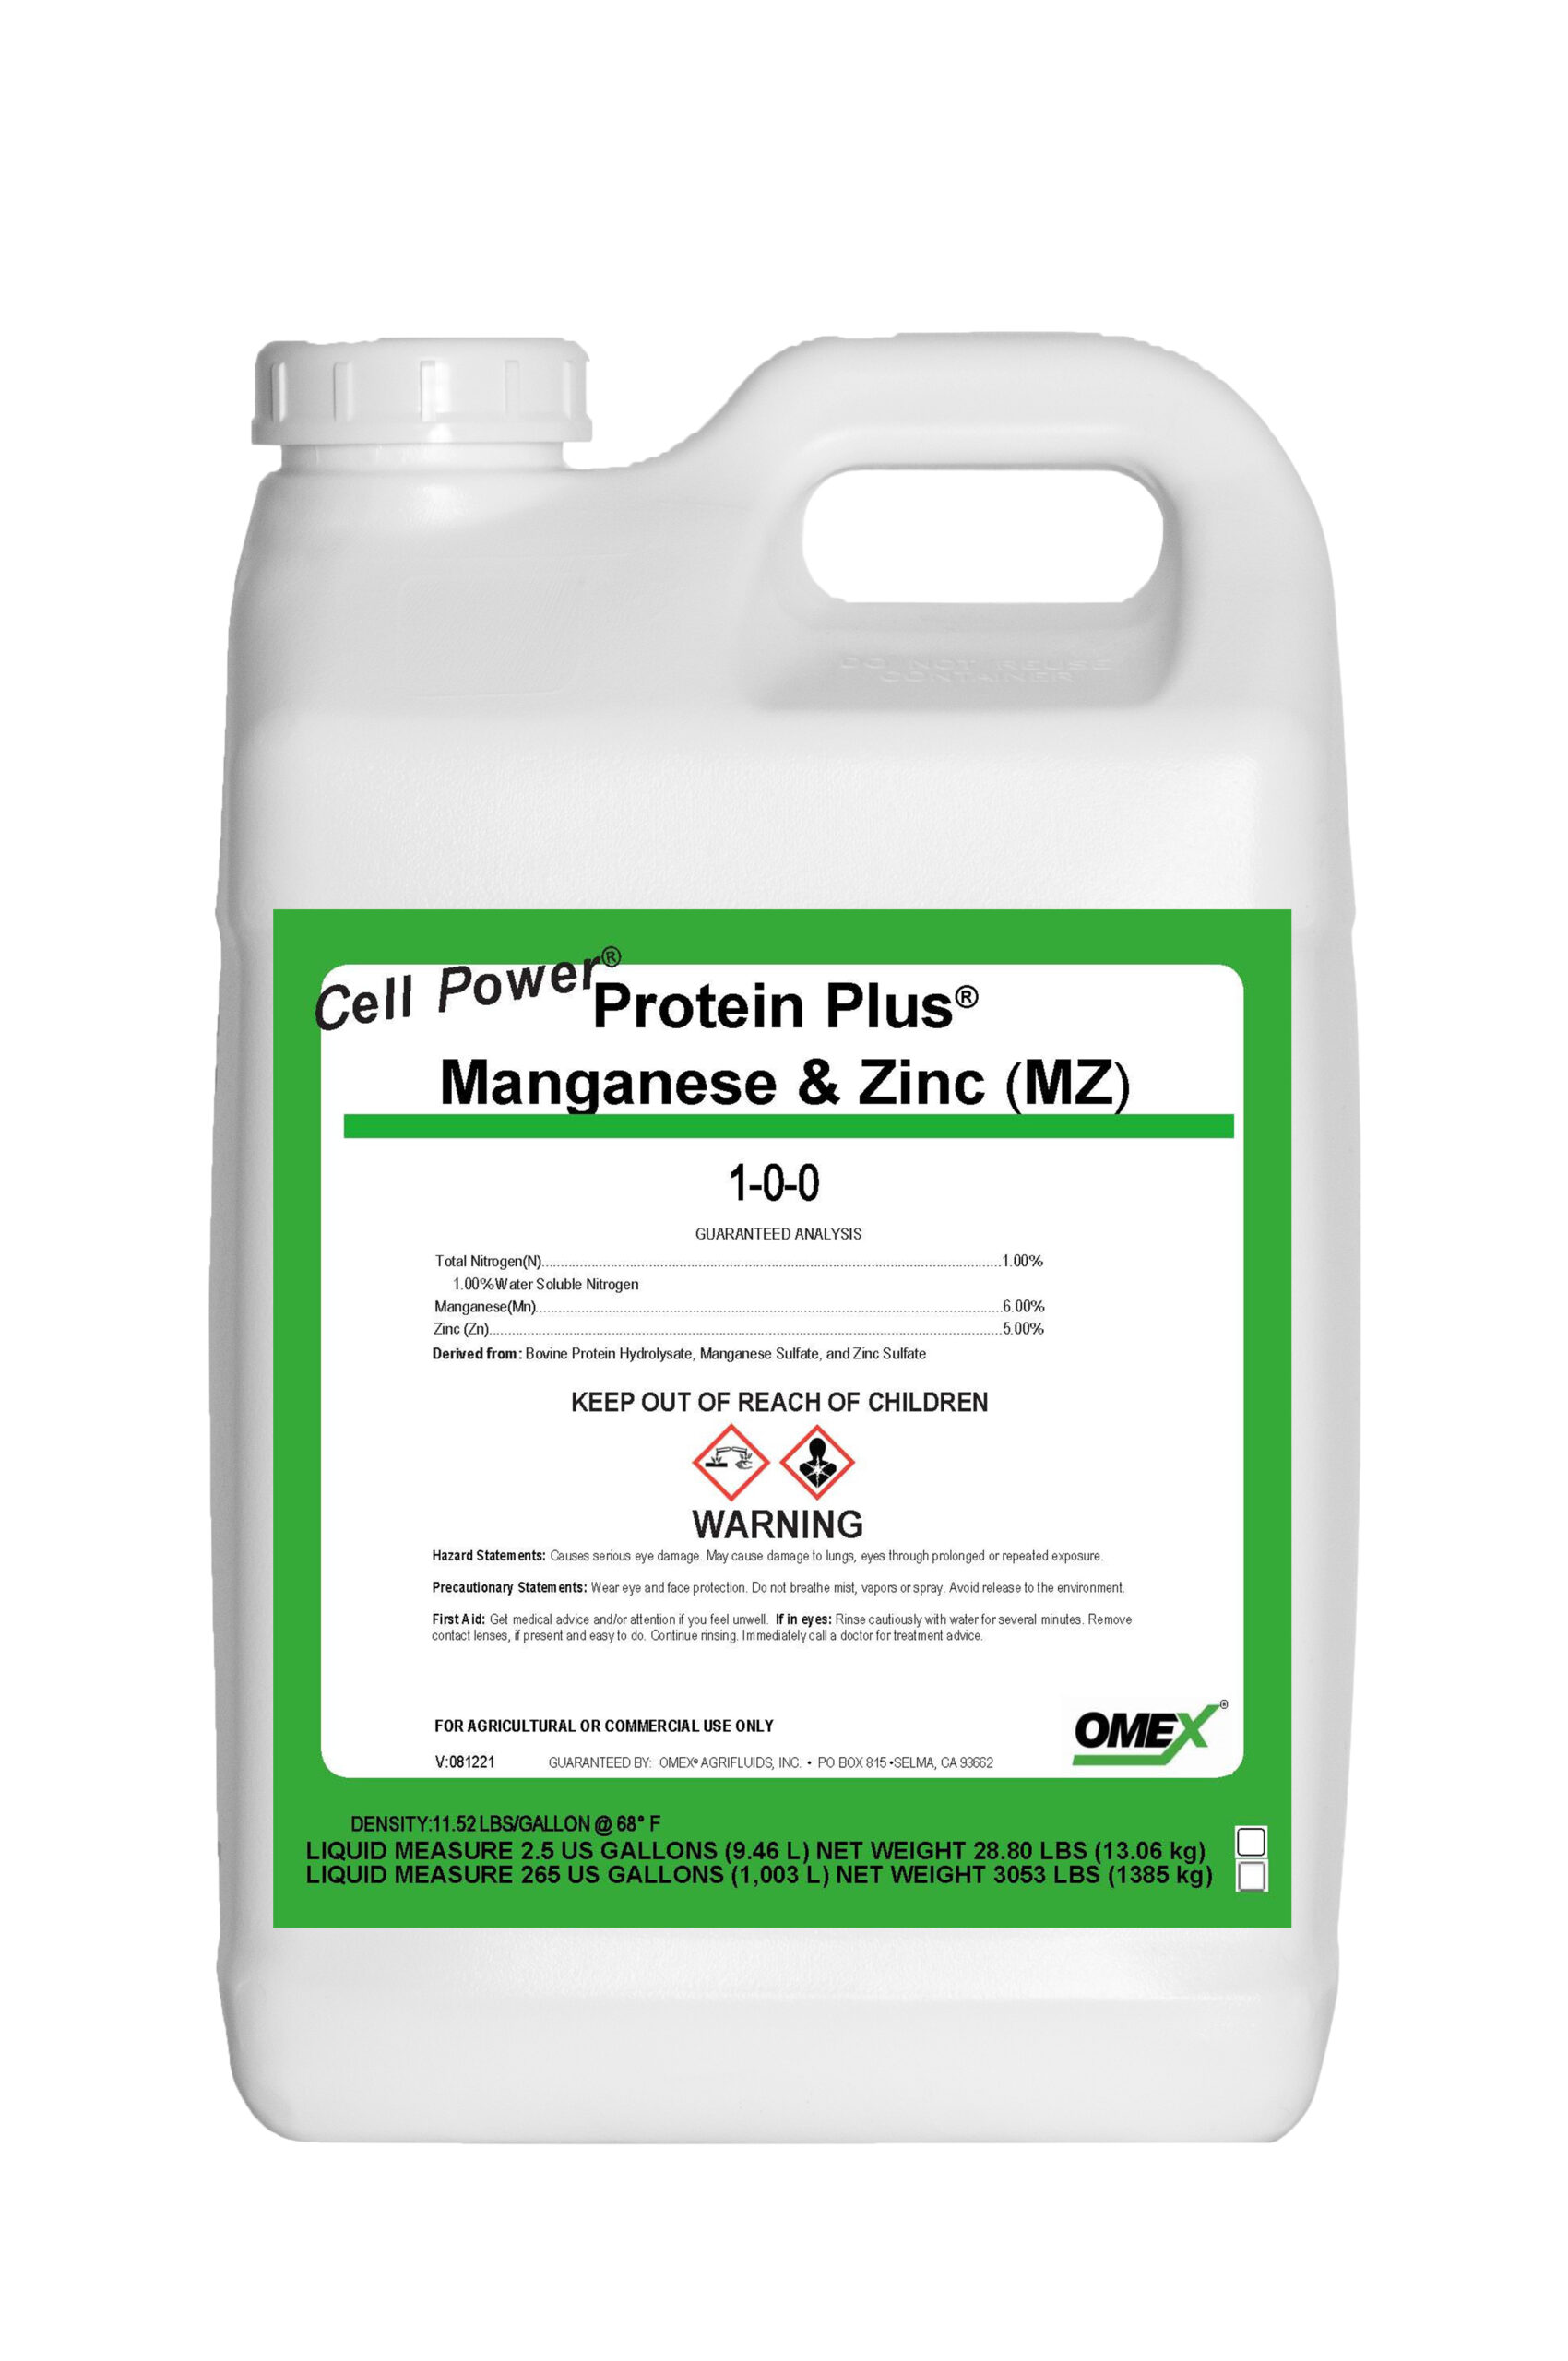 CELL POWER® Protein Plus® Manganese & Zinc (MZ) 1-0-0